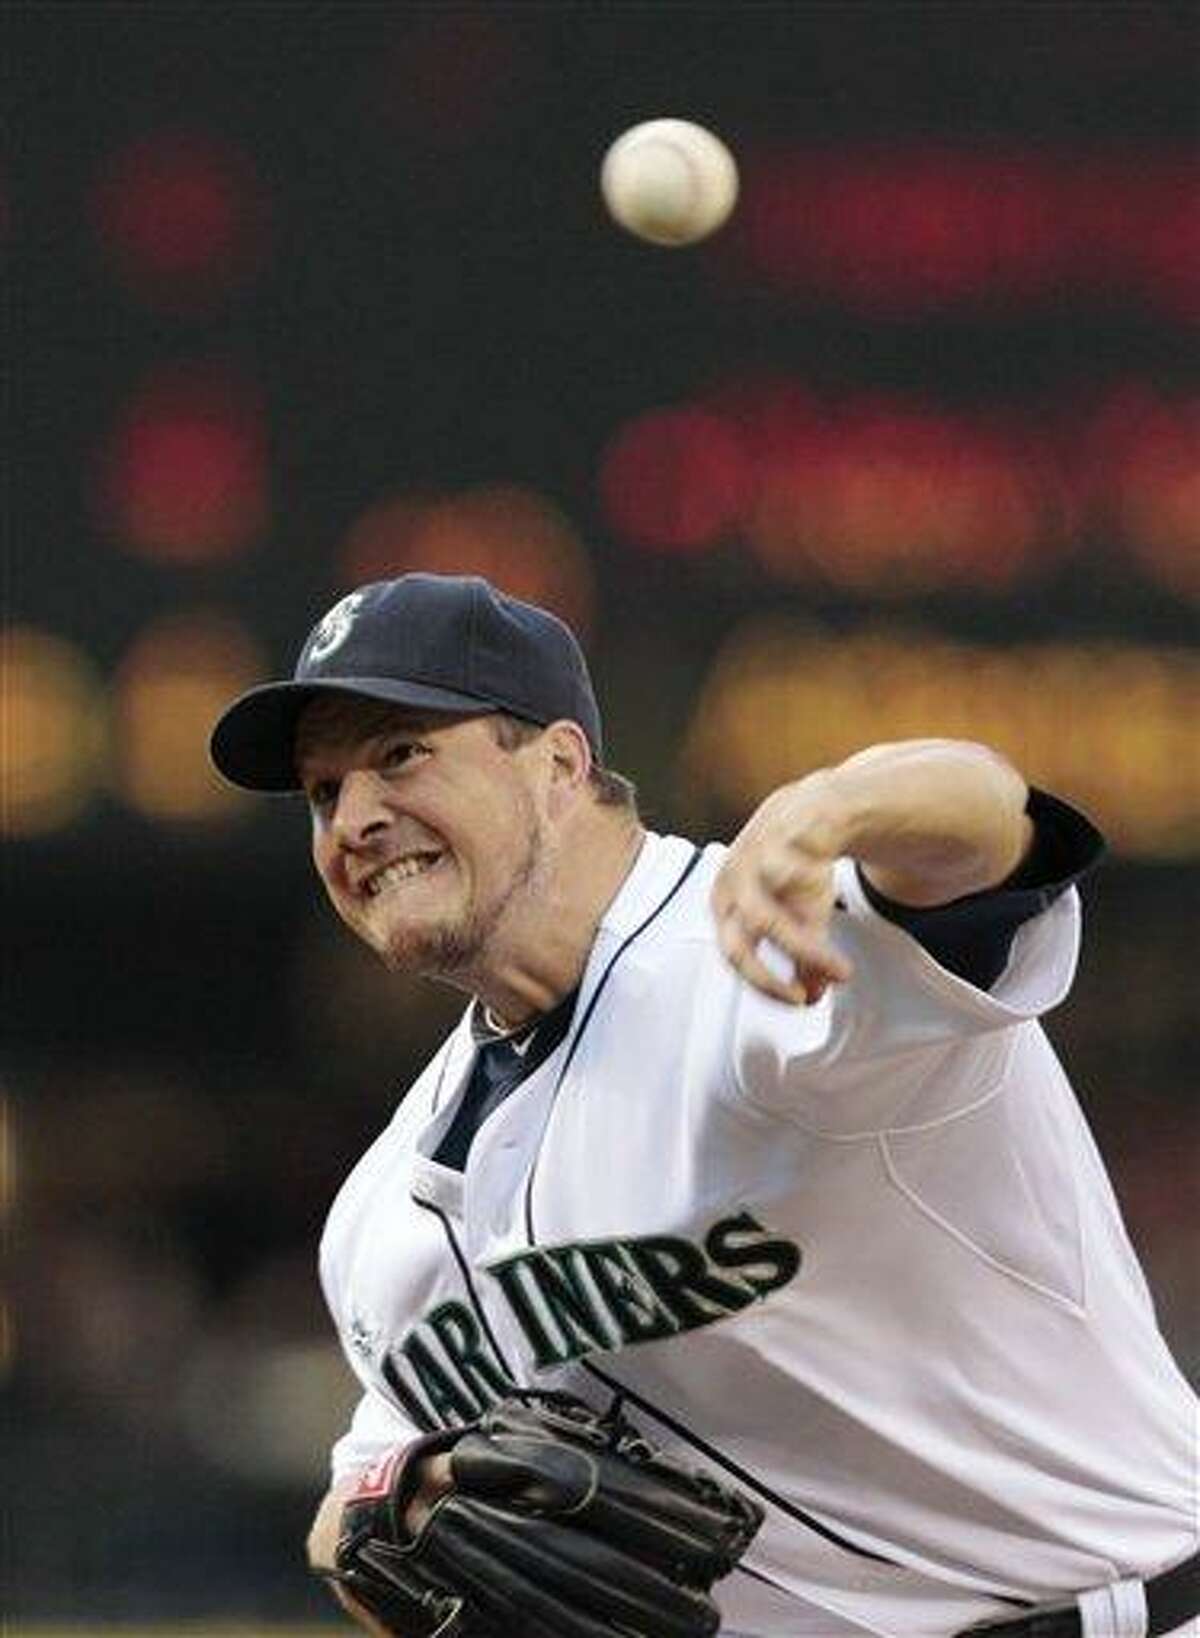 Seattle Mariners starting pitcher Erik Bedard throws to the Los Angeles Angels during the first inning of a baseball game Wednesday, June 15, 2011, in Seattle. (AP Photo/Elaine Thompson)